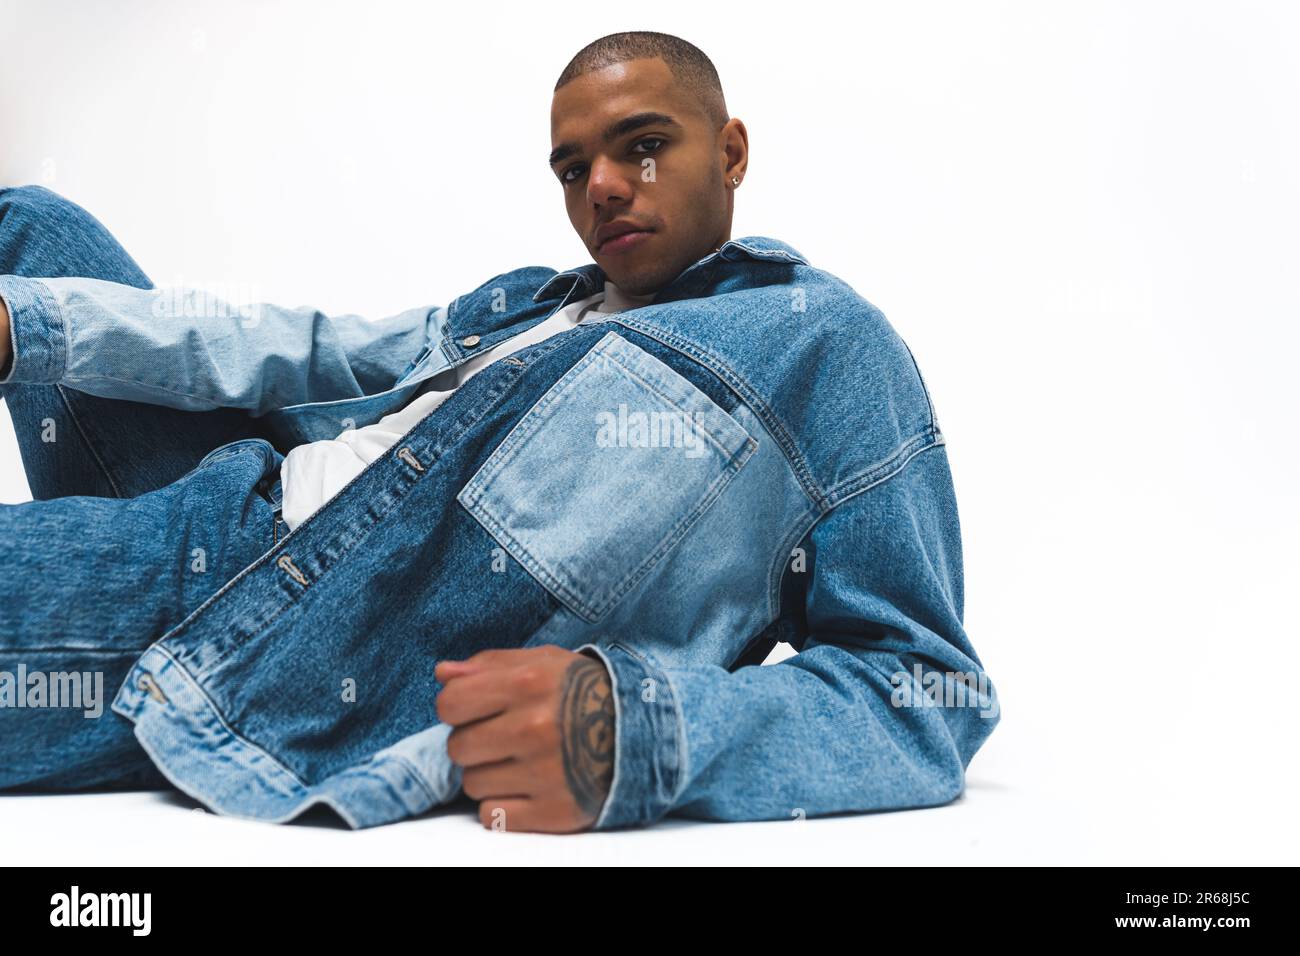 African American man wearing a denim jacket and jeans striking a pose on the floor. Isolated against a white background. High-quality 4k footage Stock Photo